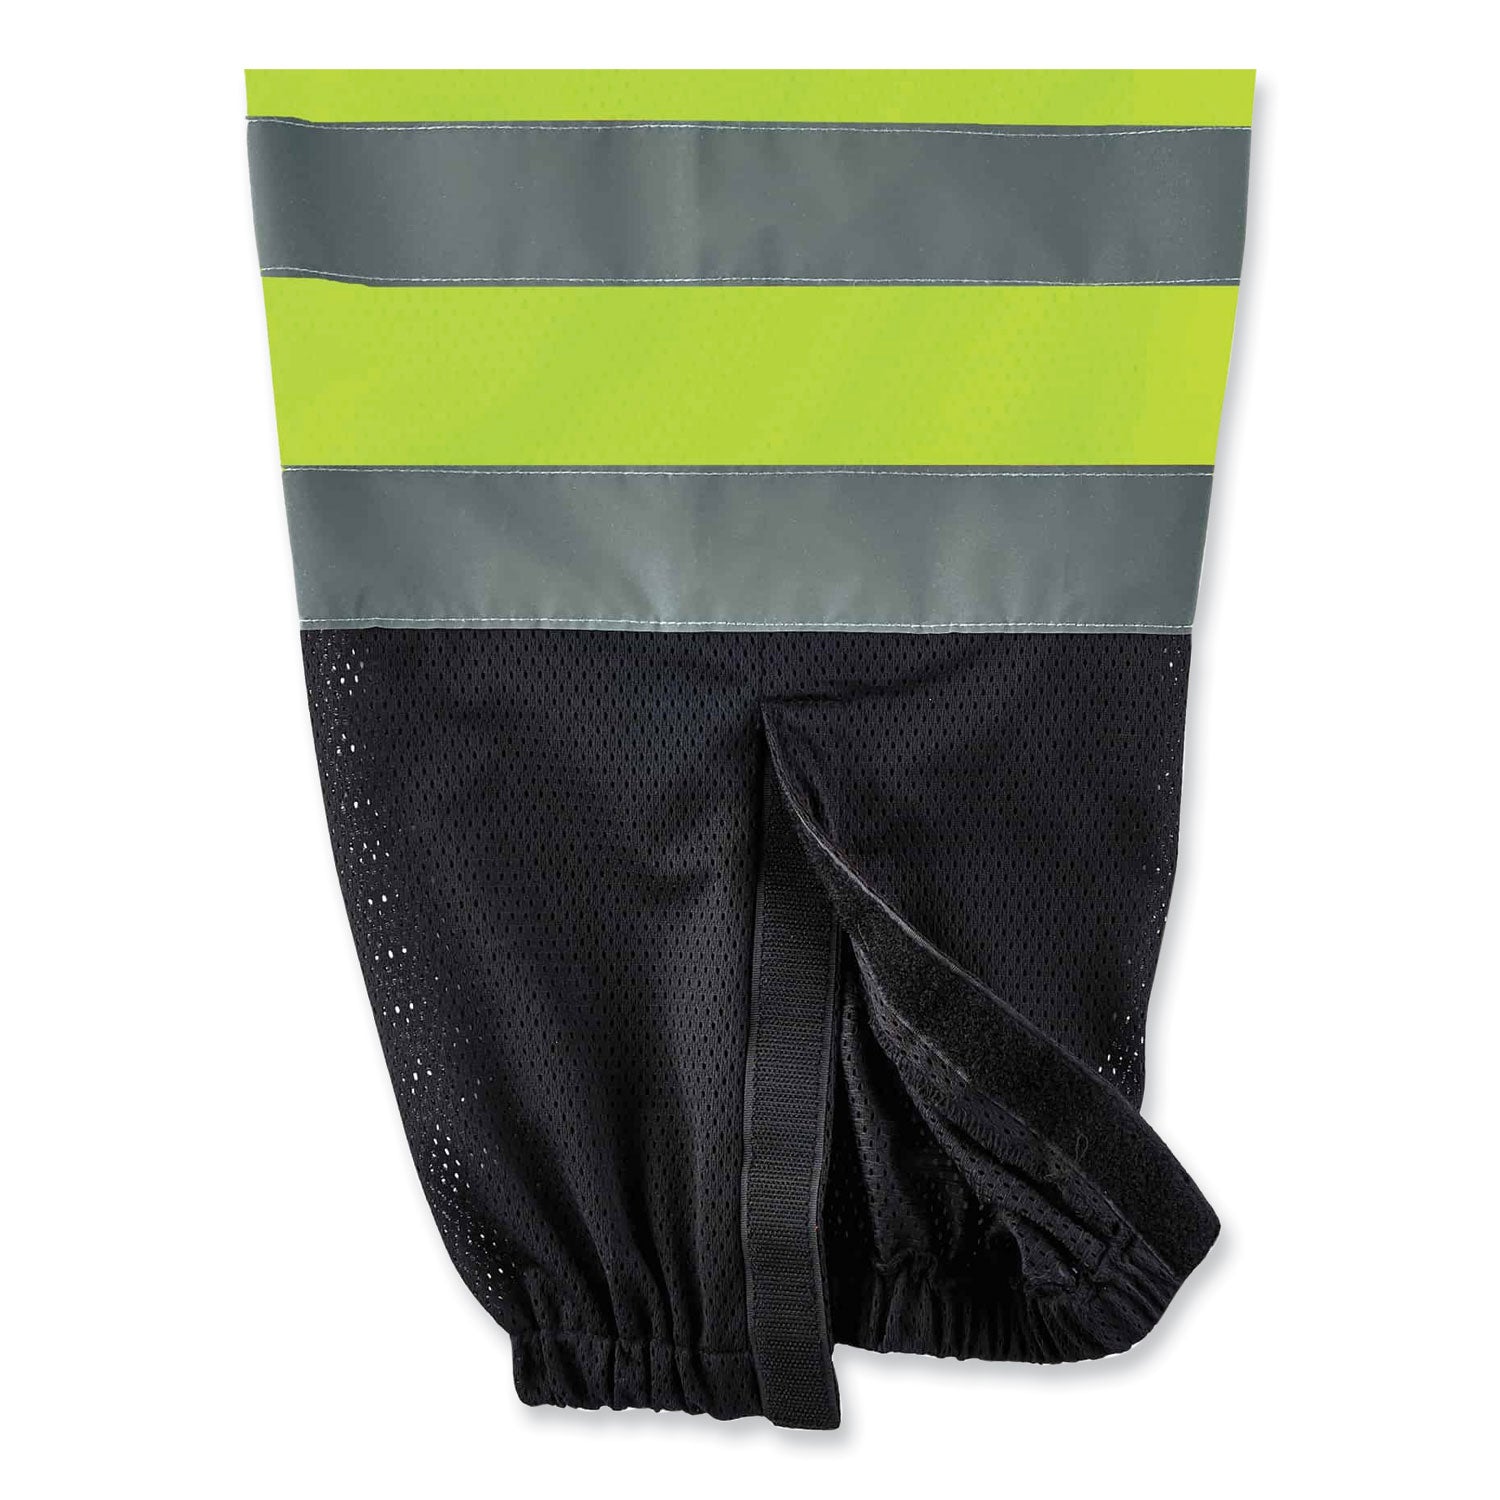 glowear-8910bk-class-e-hi-vis-pants-with-black-bottom-polyester-small-medium-lime-ships-in-1-3-business-days_ego23953 - 3